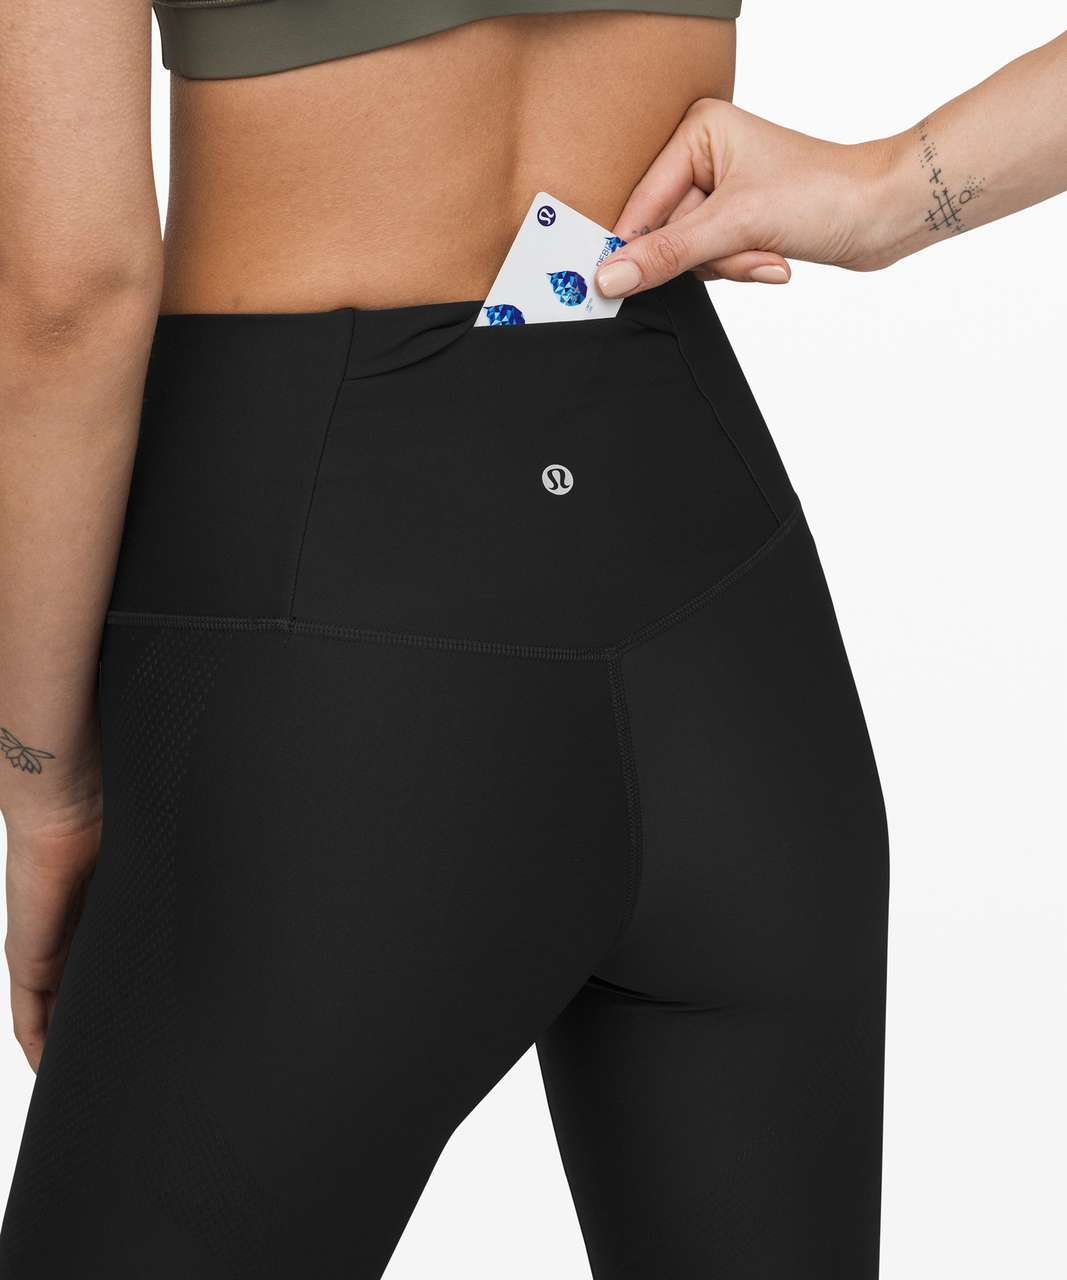 Lululemon Mapped Out High-Rise Tight 28" - Black / Black